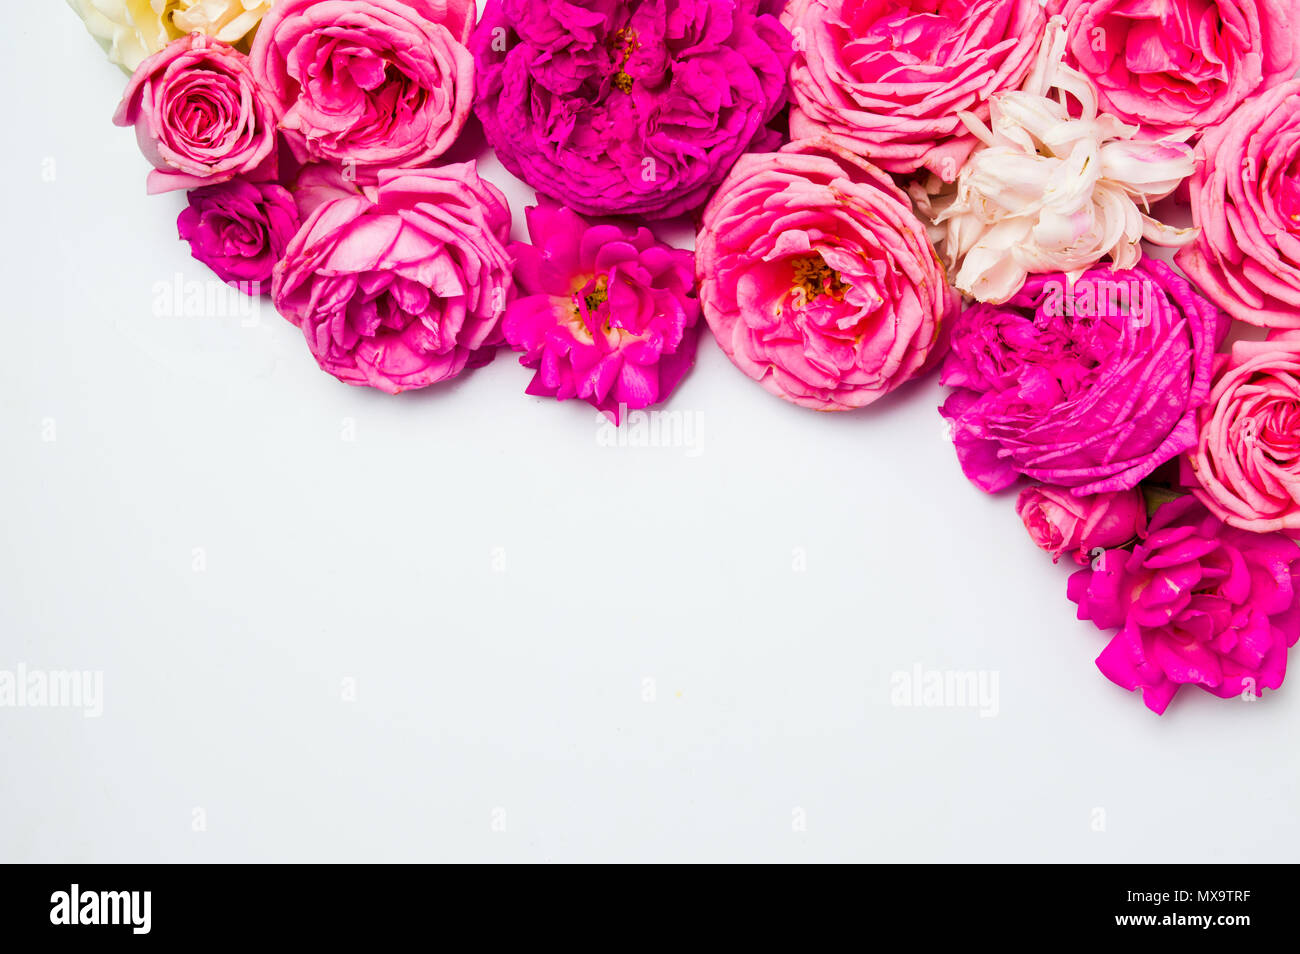 Colorful roses arrangement on white background with copy space Stock Photo